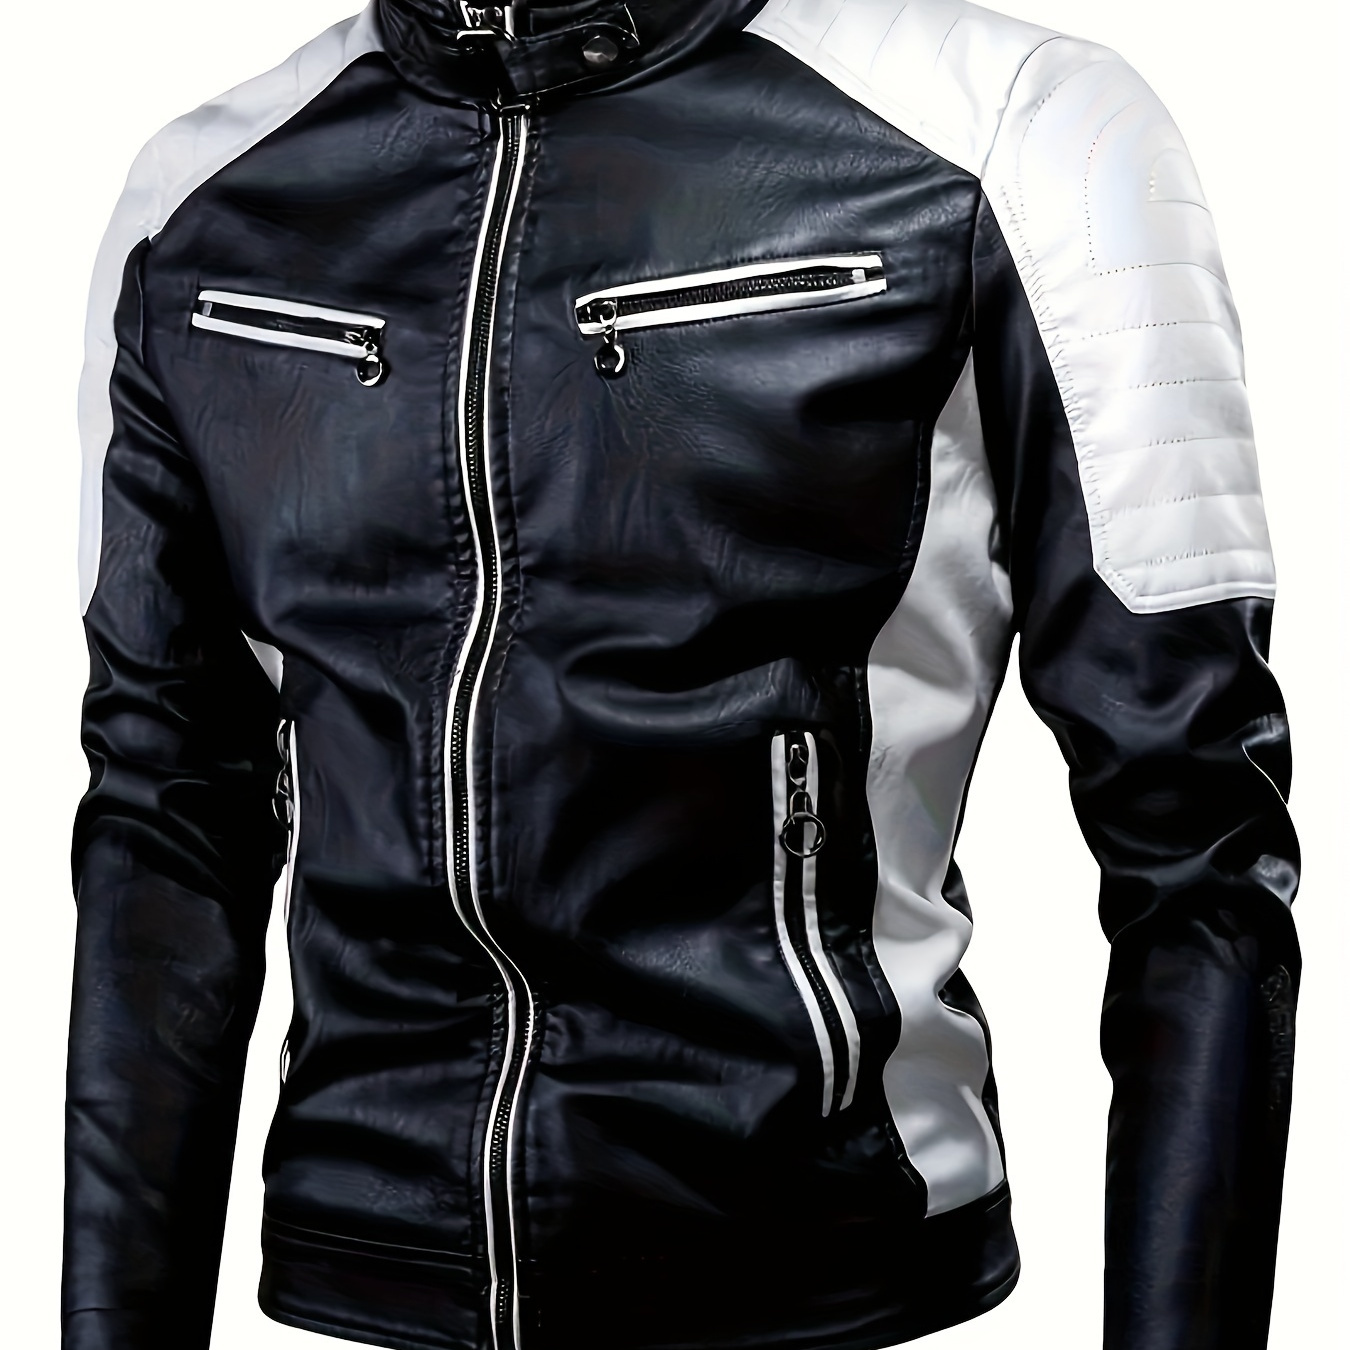 

Men's Color Matching Pu Leather Jacket With Multi Zipper Pockets, Casual Breathable Stand Collar Zip Up Long Sleeve Jacket For Outdoor